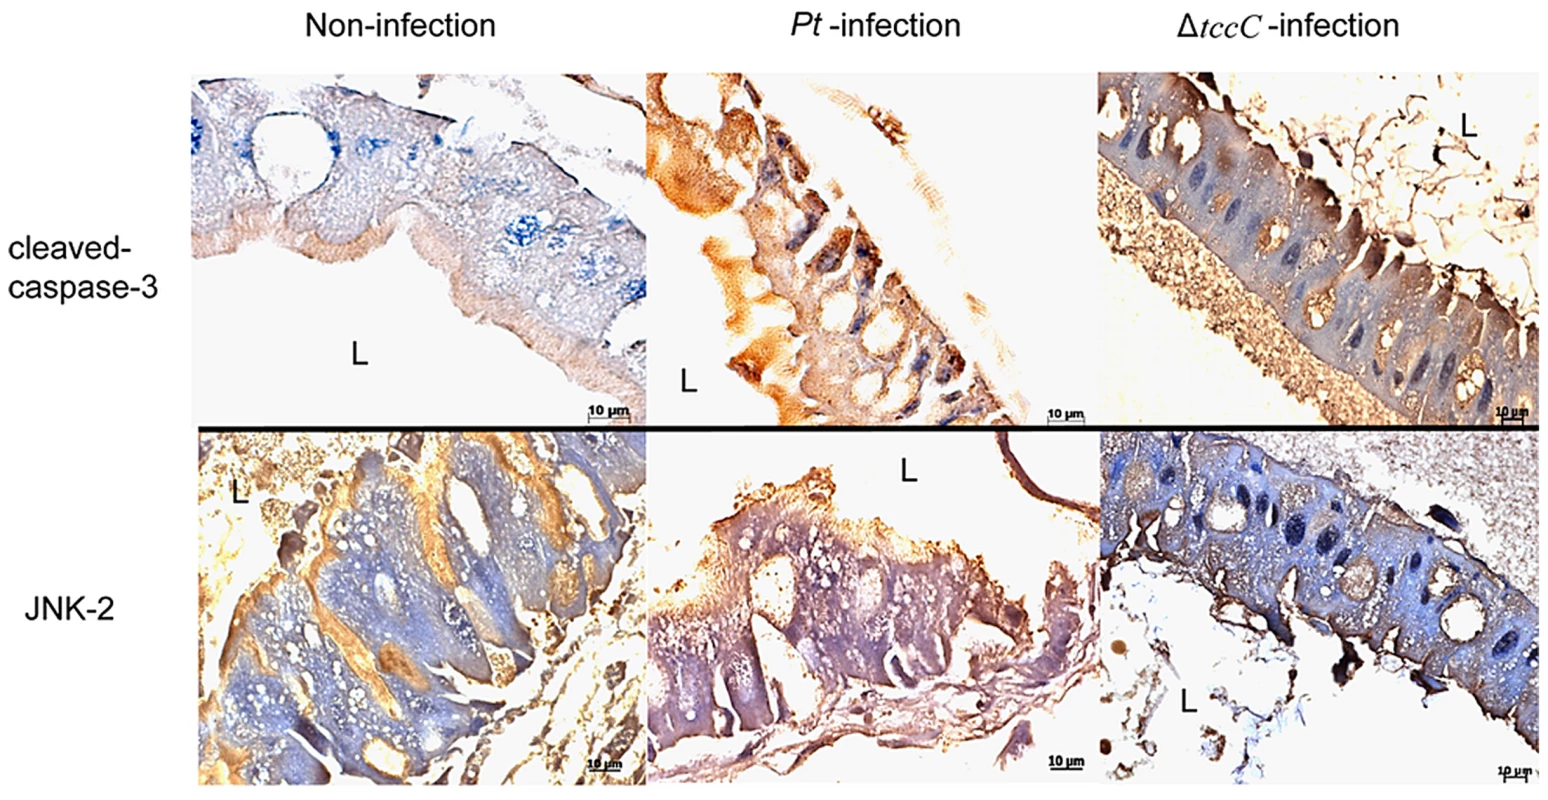 Immunohistochemical analysis of cleaved-caspase-3 and JNK-2 protein expression level in the gut tissue of <i>P. xylostella</i> larva.